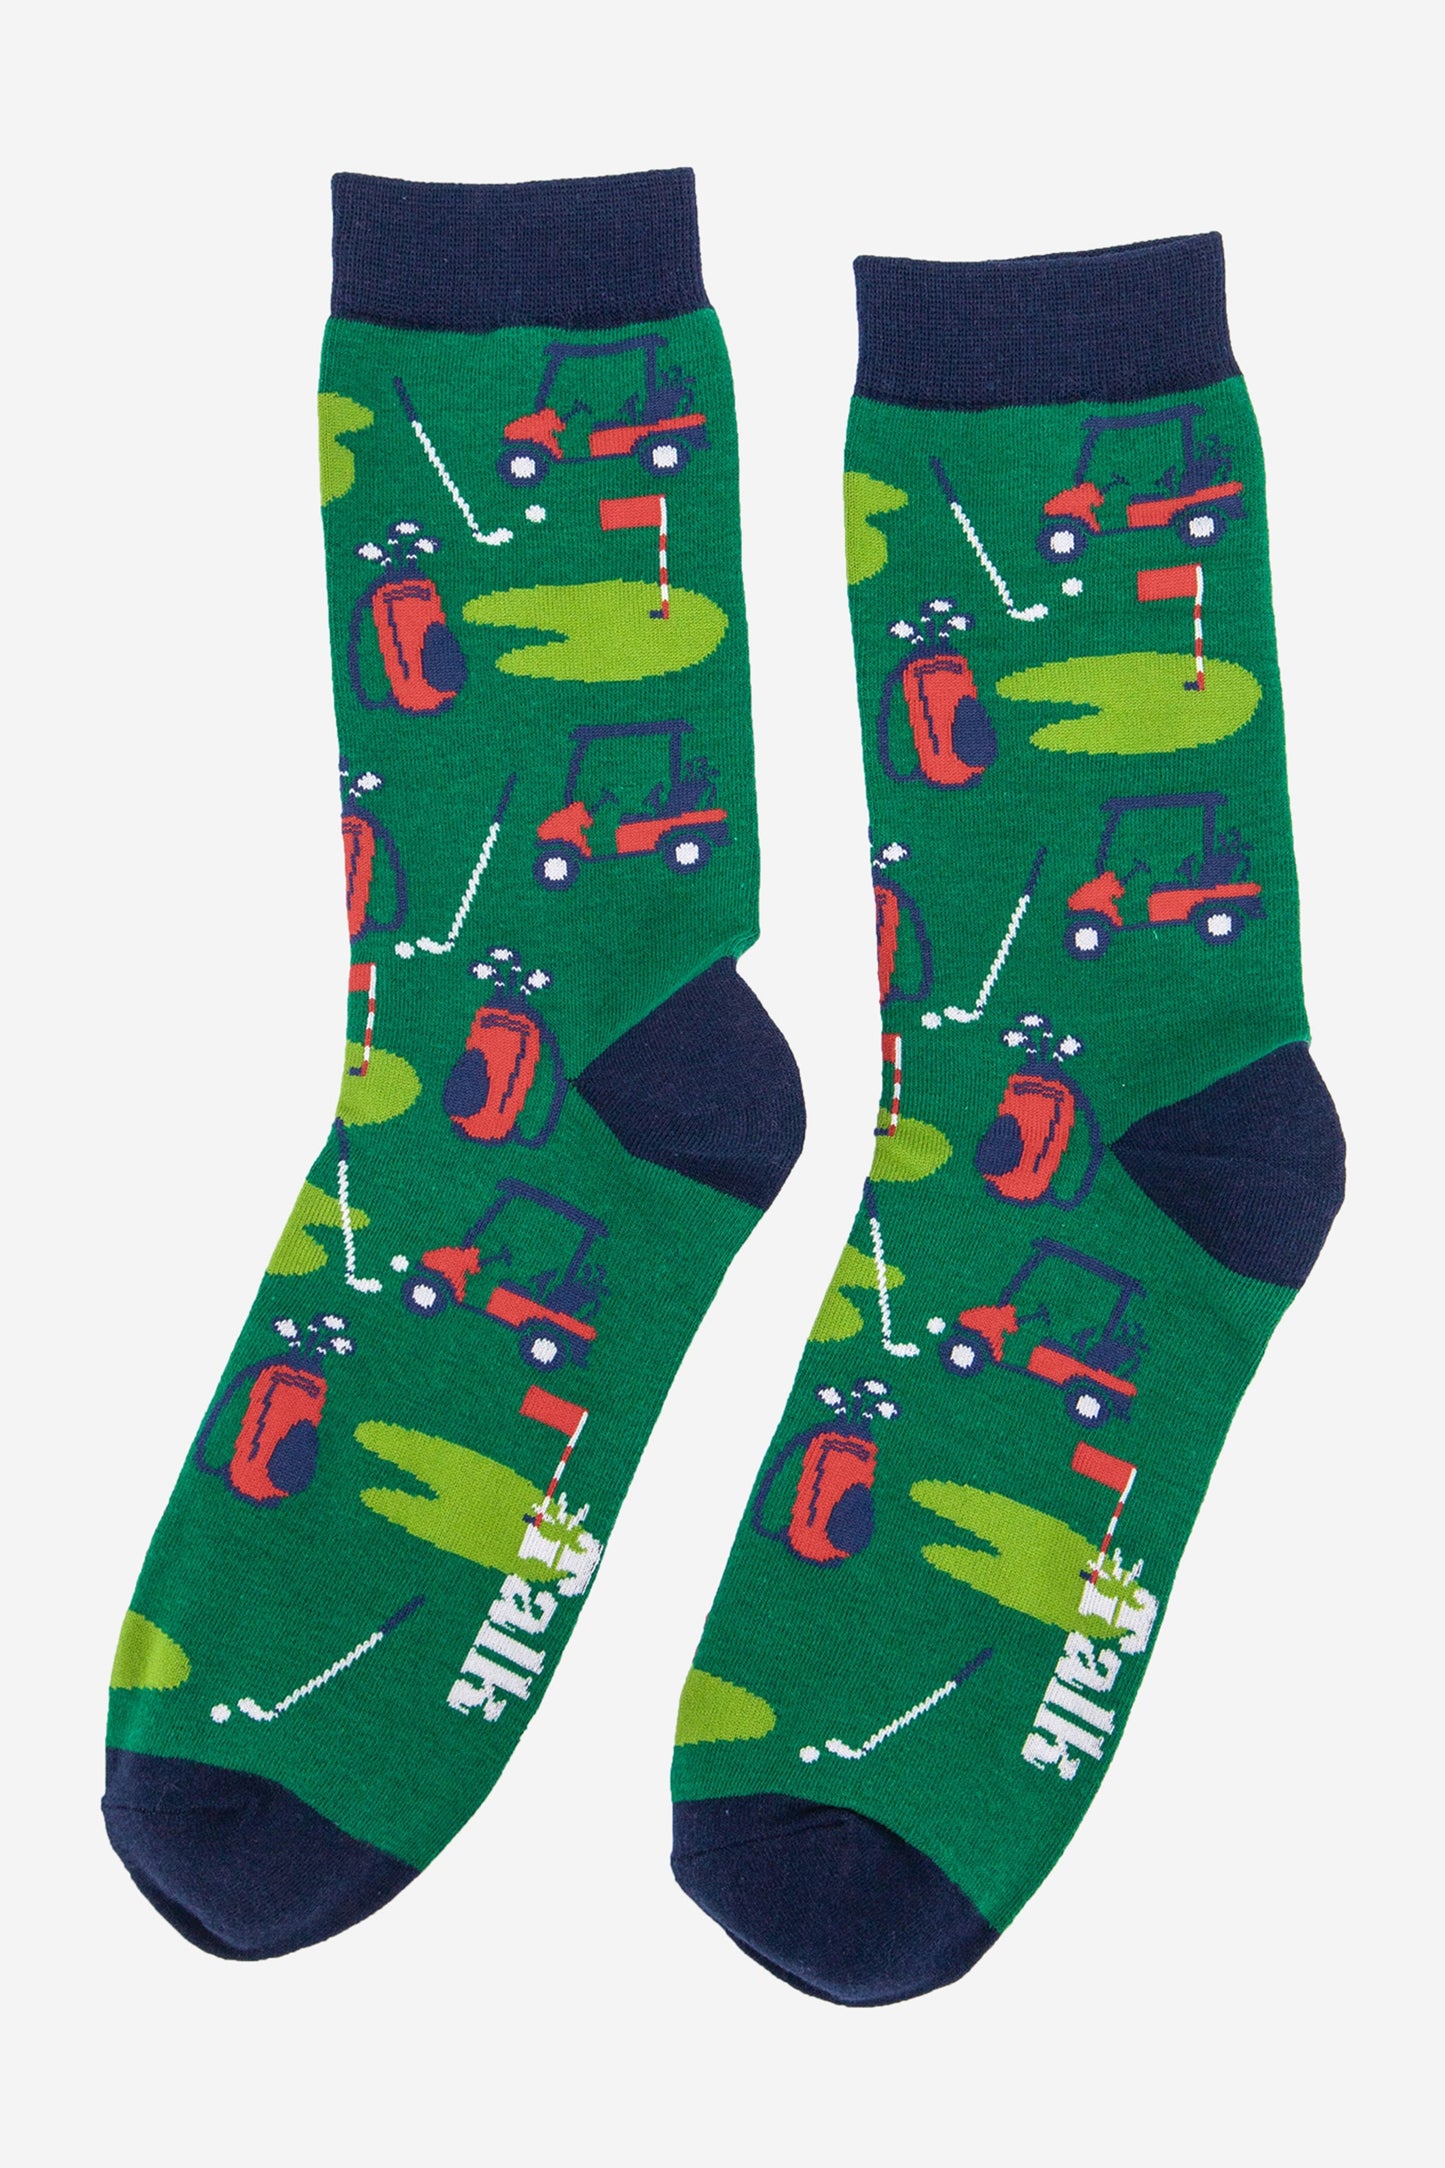 mens bamboo golf socks in green with a navy blue heel, toe and trim